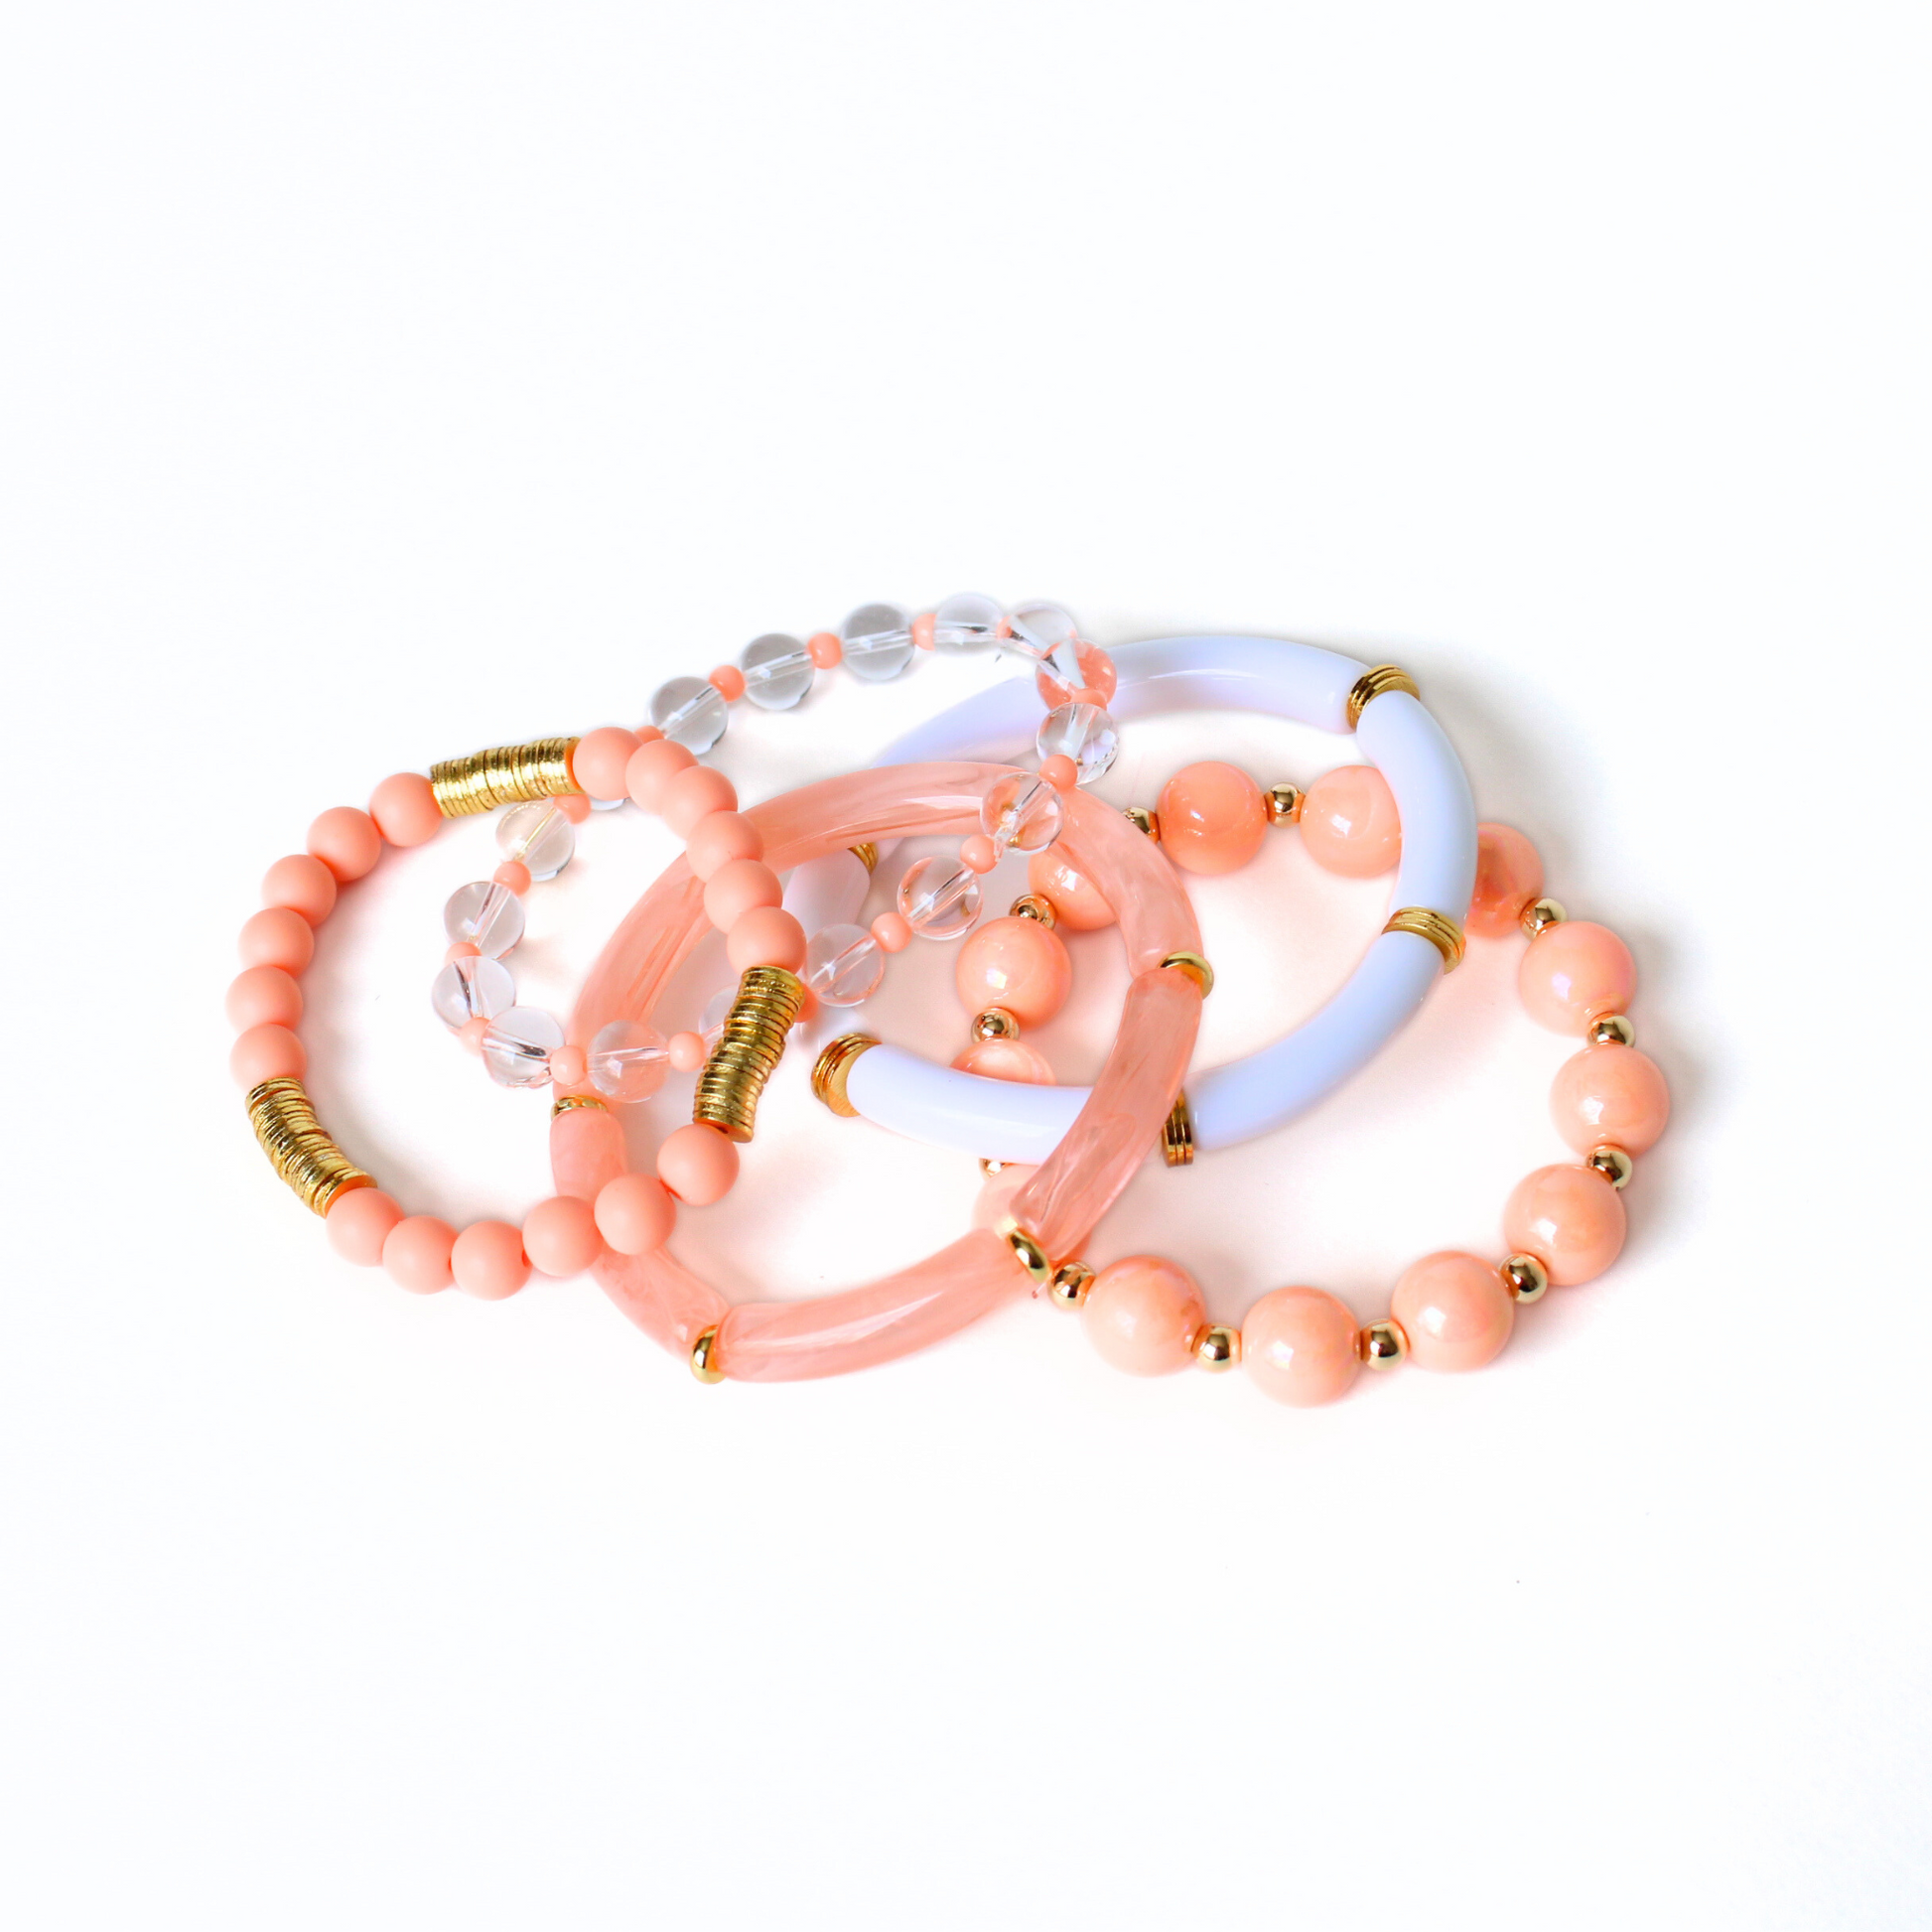 5-peice peach golden hour bracelet stack. This bracelet stack has two 8mm skinny bamboo acrylic tube bangles; peach marble and white. Clear 6mm quartz round beads with alternating 4mm peach acrylic beads. 12mm chunky acrylic round beads with alternating gold filled round beads. And also designed with 6mm peach acrylic round beads with gold plated flats.